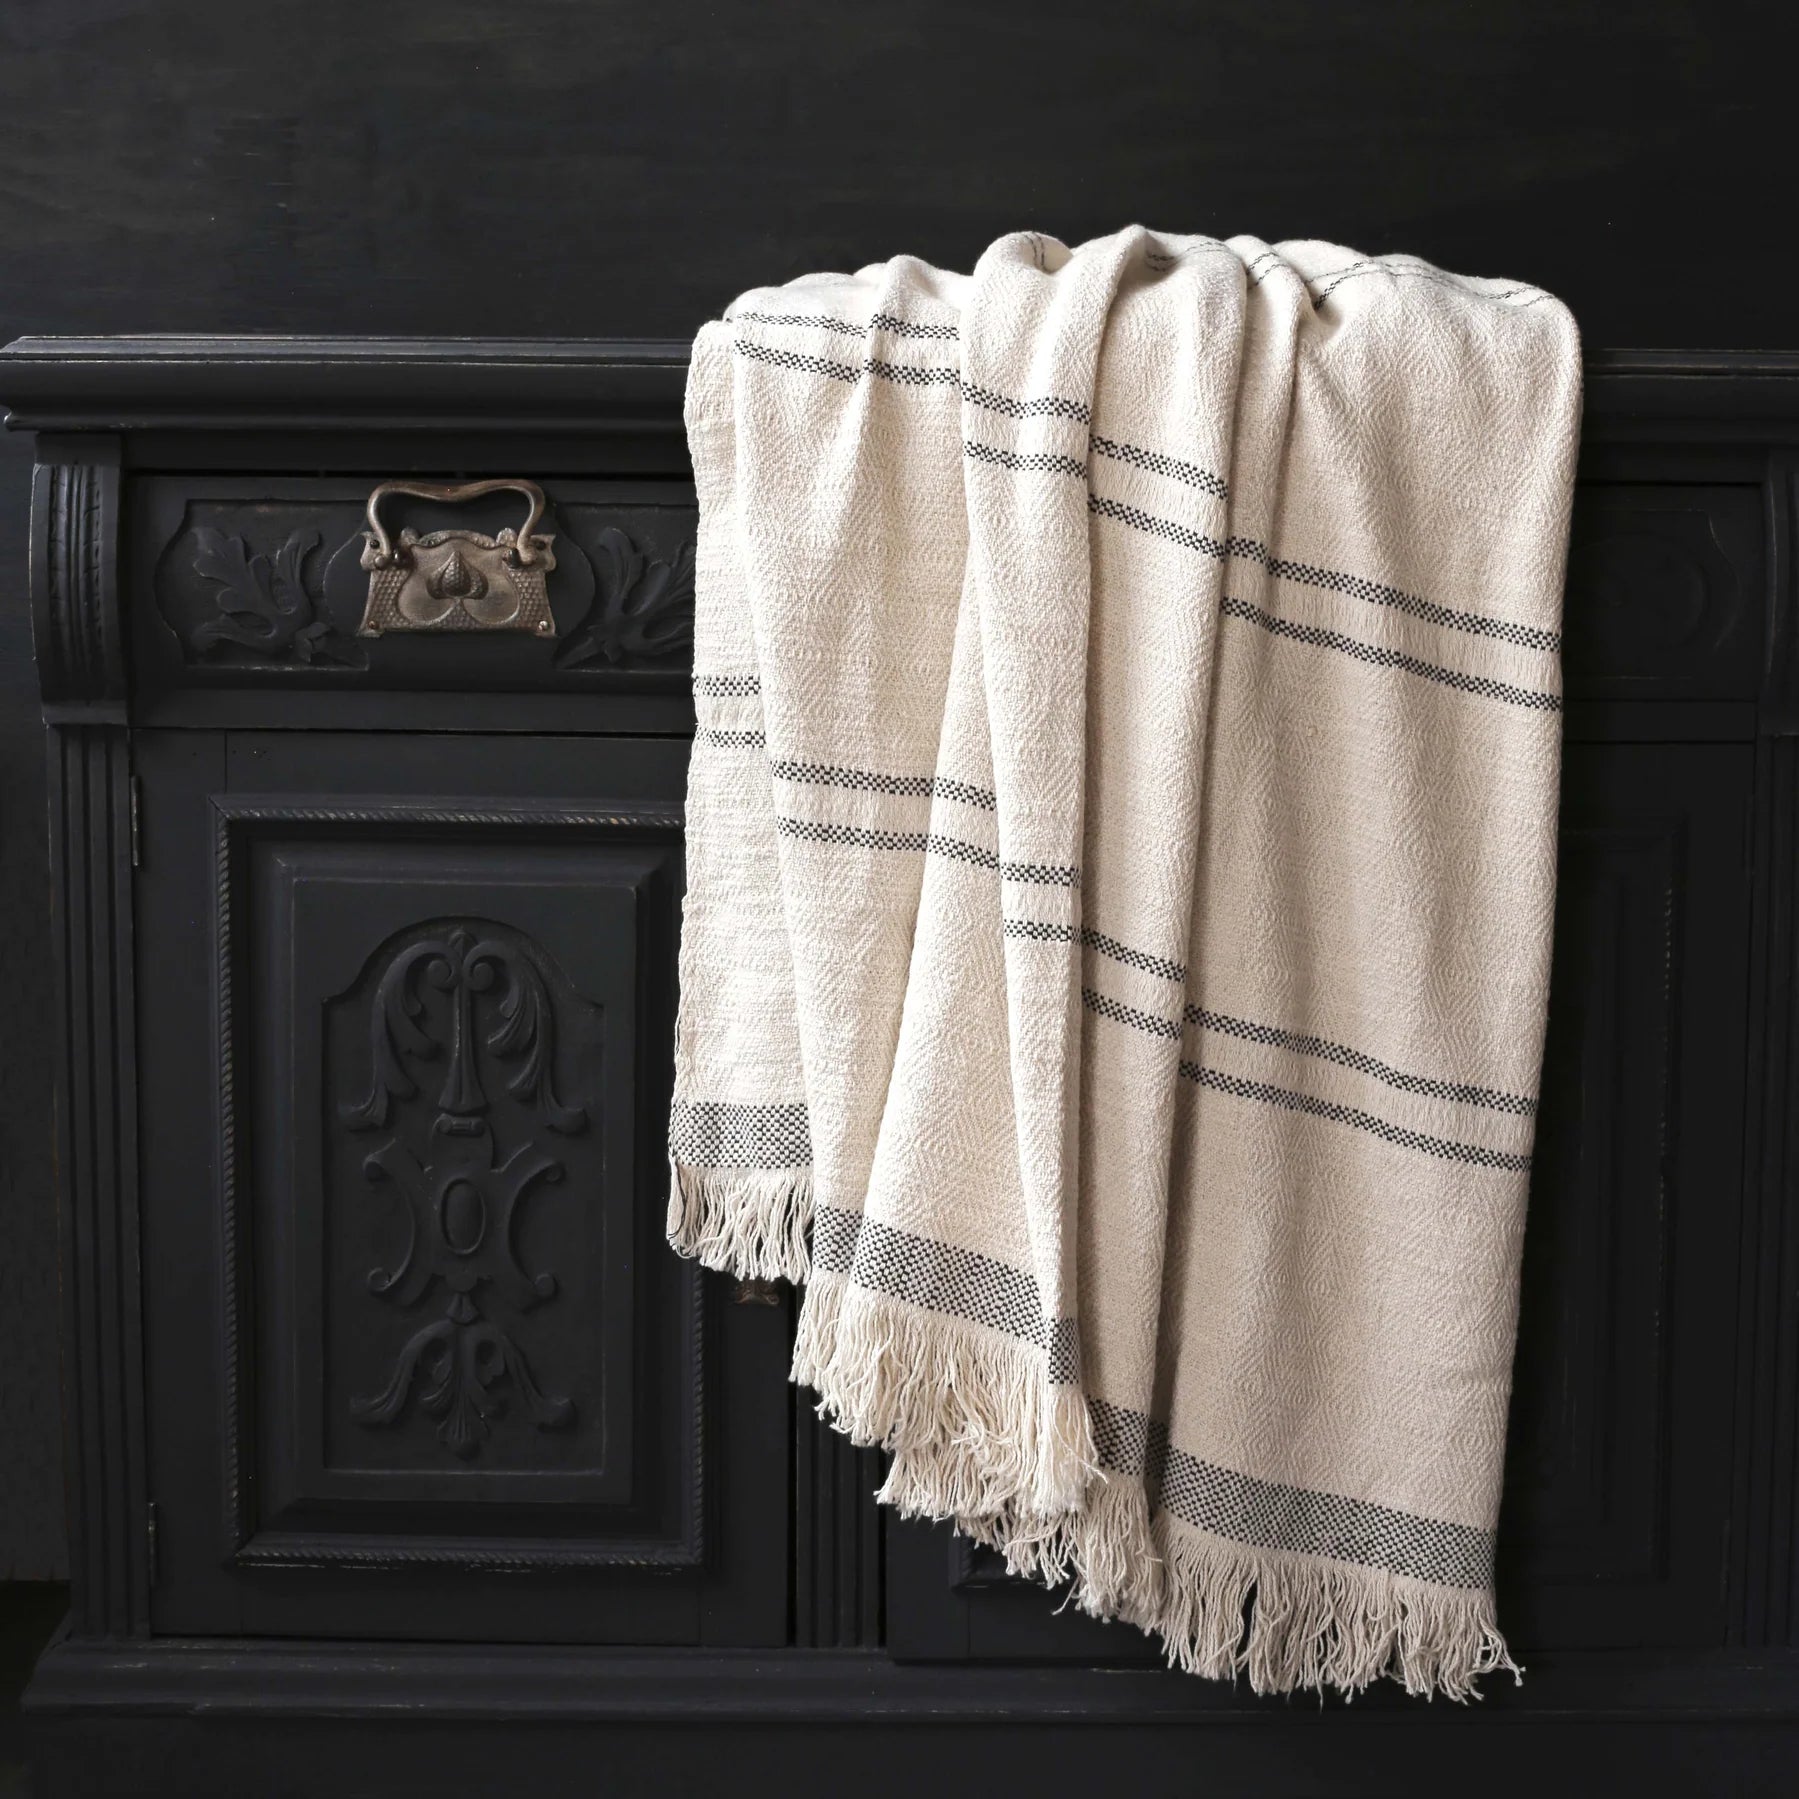 Draped cotton throw blanket with slate stripes on a painted black table.